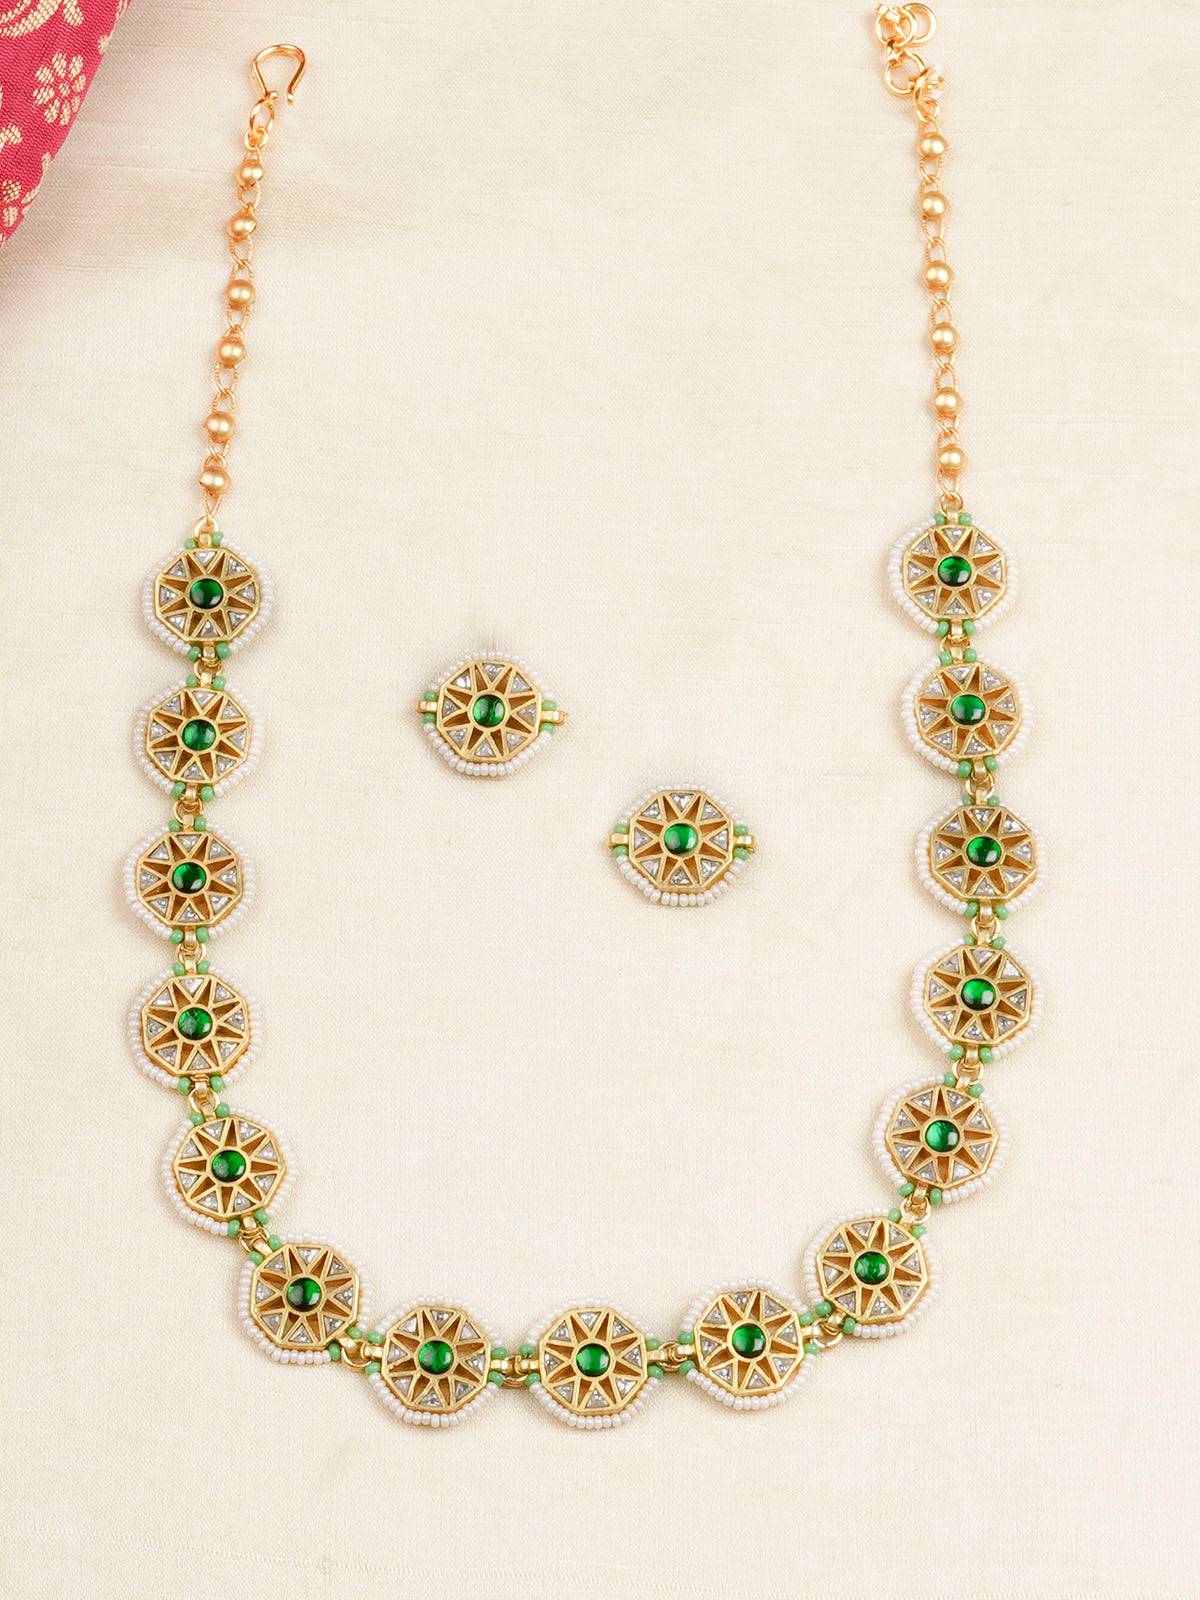 MR-S629W - Green Color Gold Plated Mishr Necklace Set